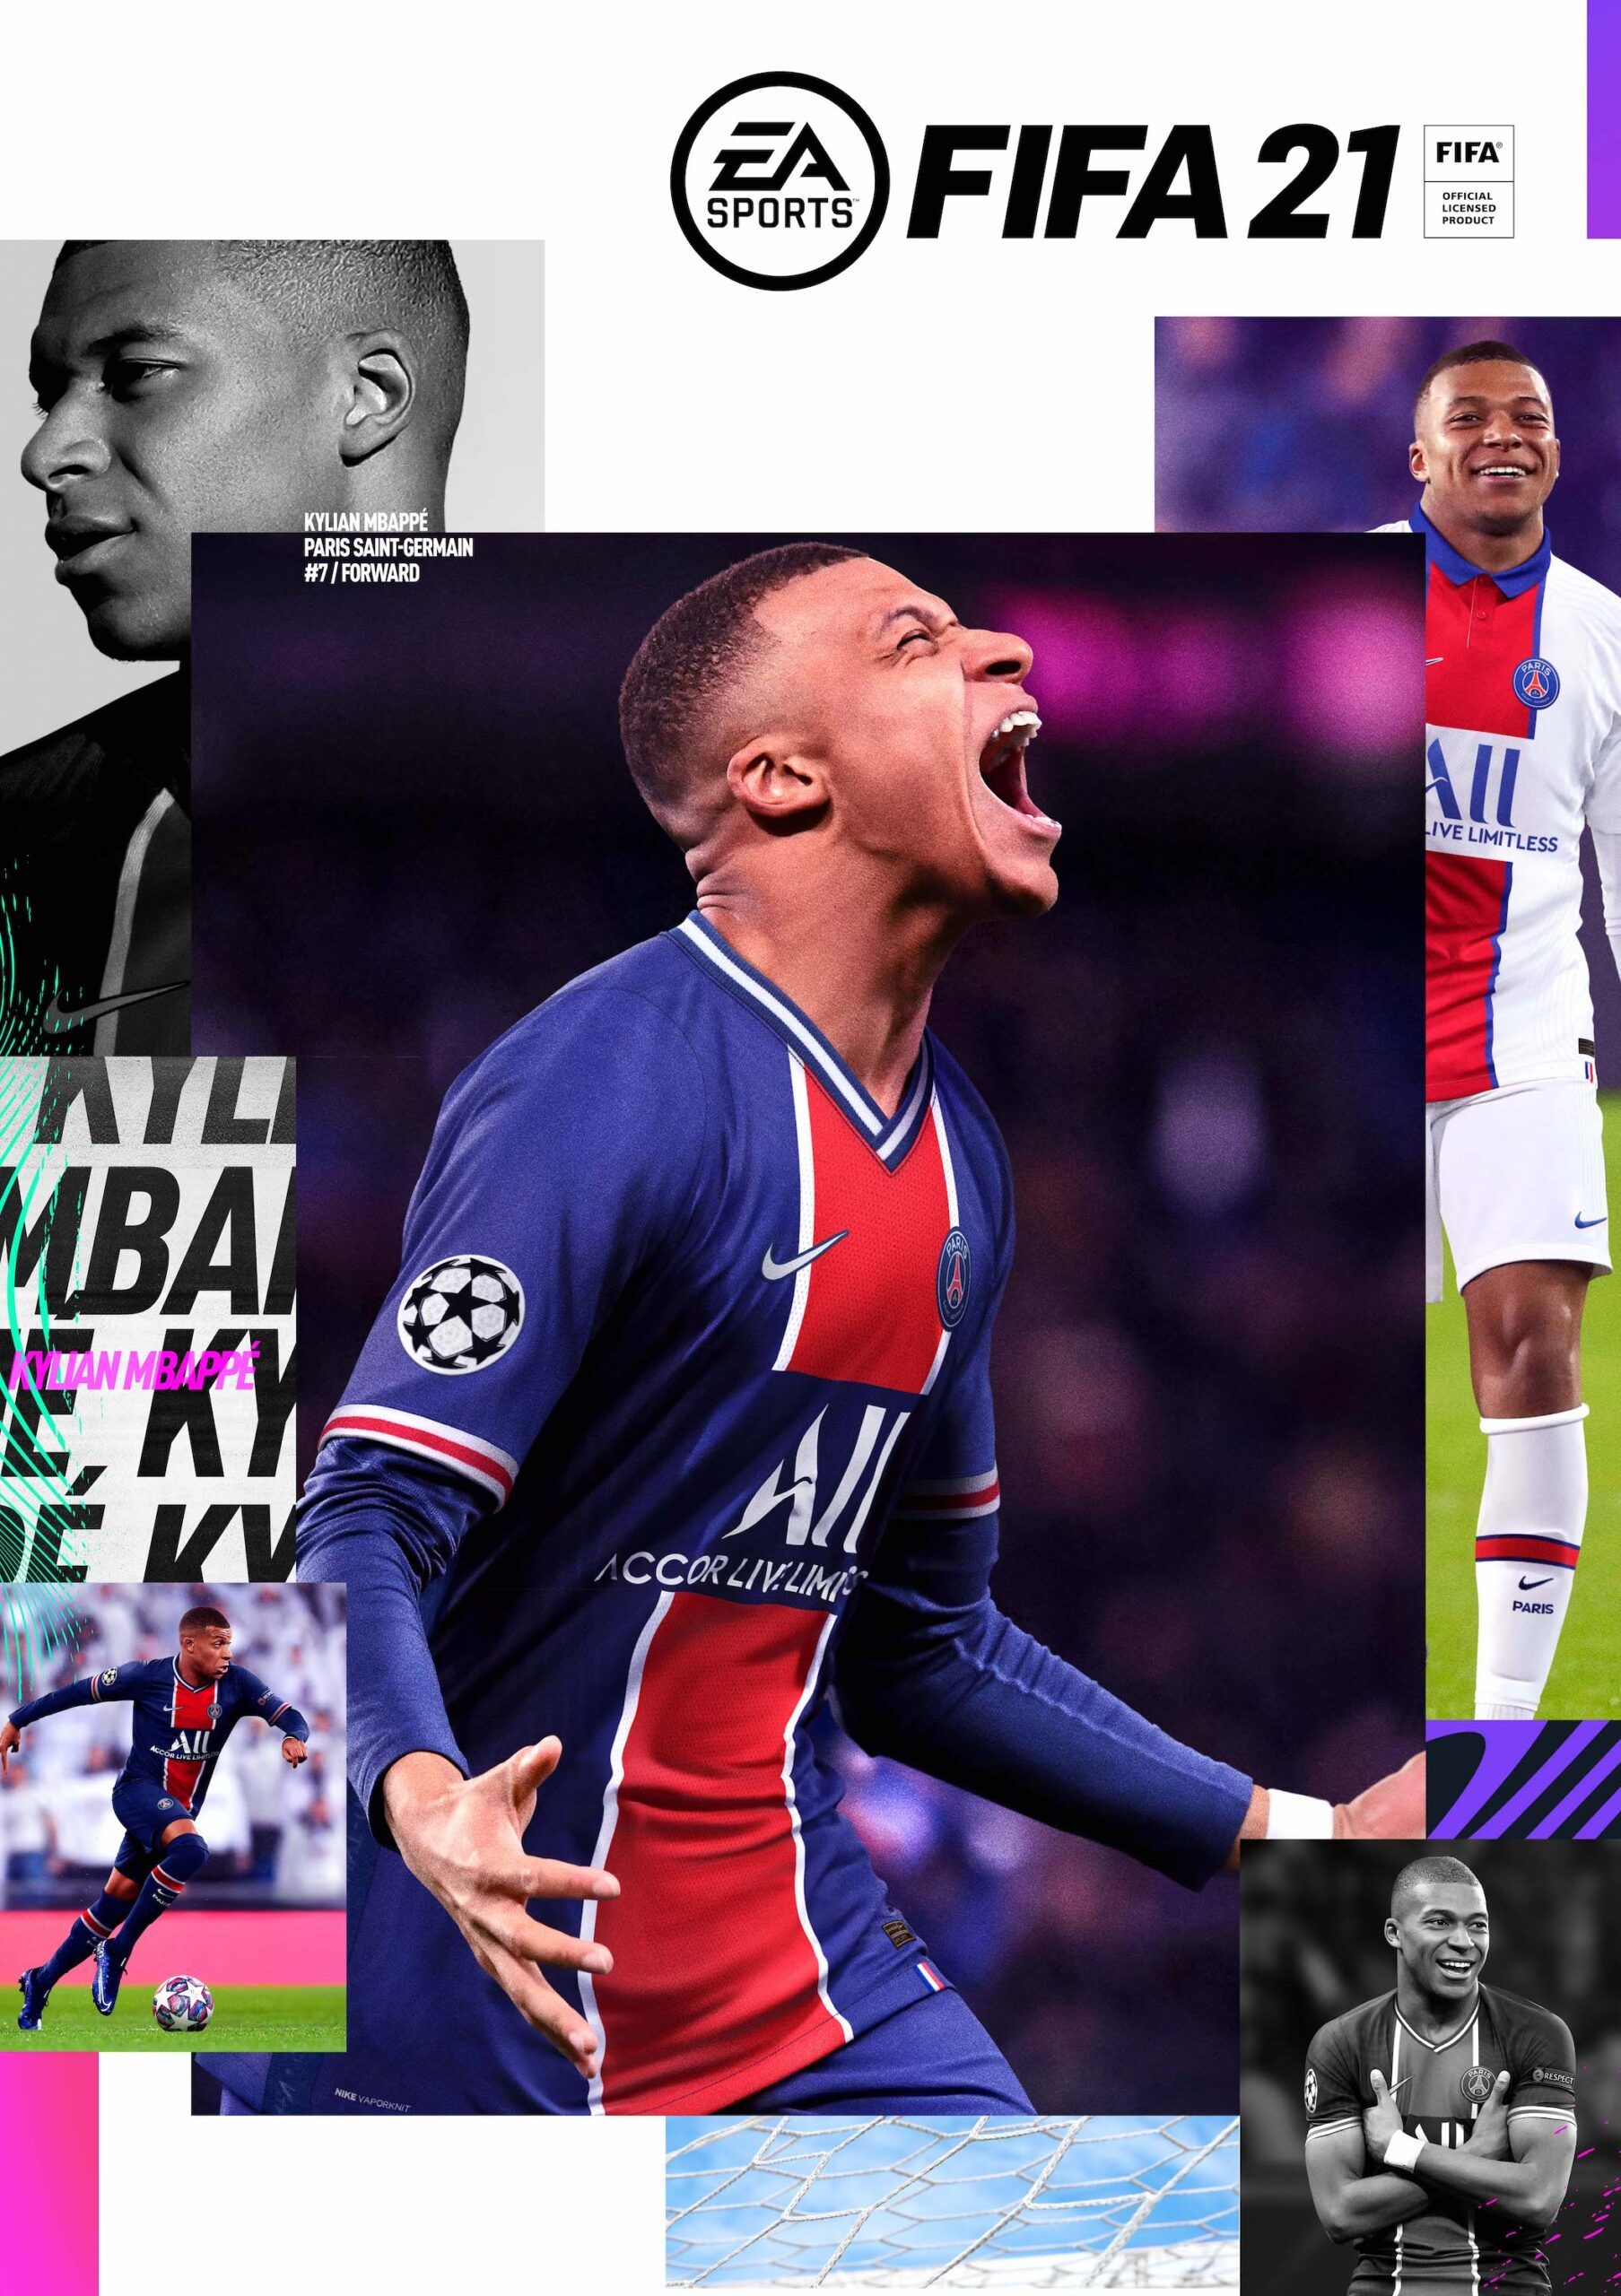 FIFA 21: Official Cover Star with Kylian Mbappe unveiled. FifaUltimateTeam.it